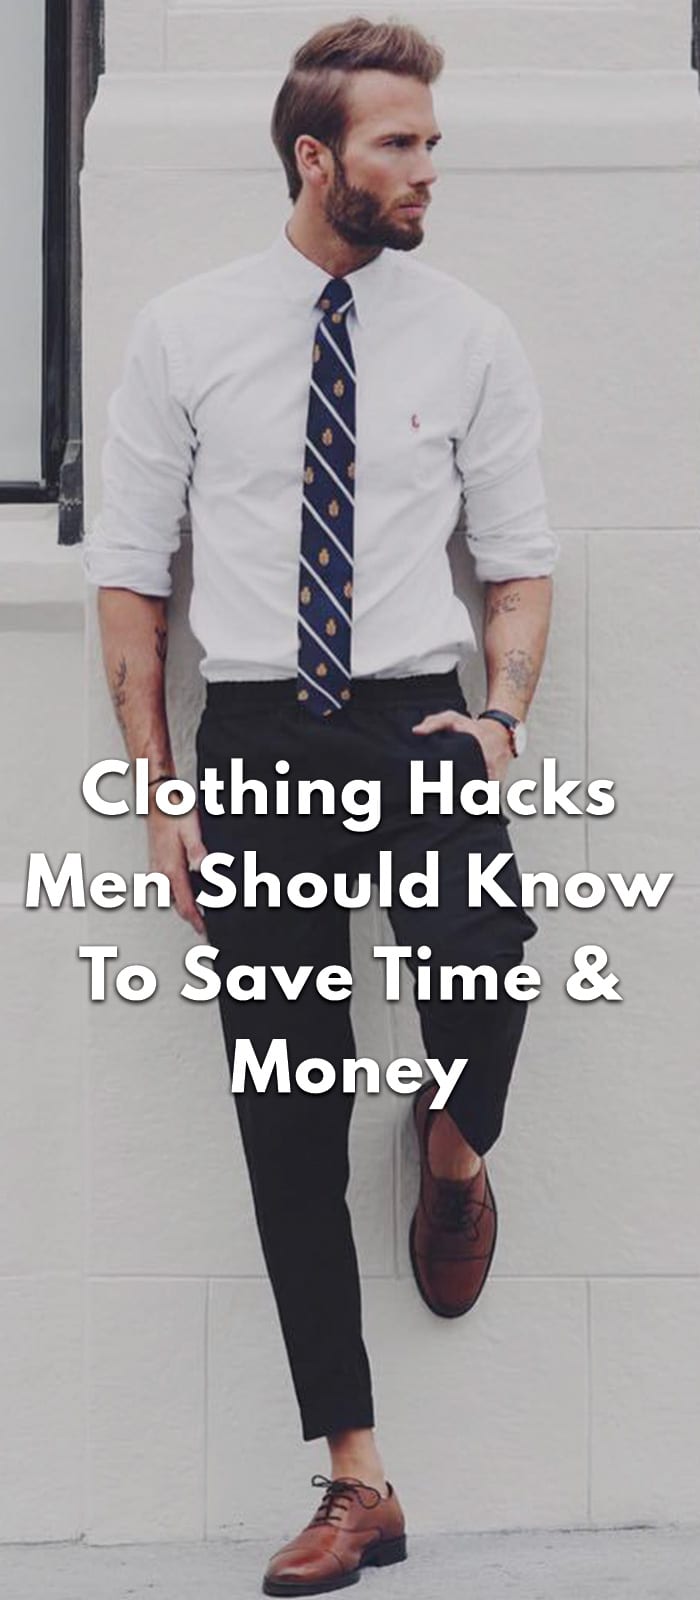 Clothing-Hacks-Men-Should-Know-To-Save-Time-&-Money